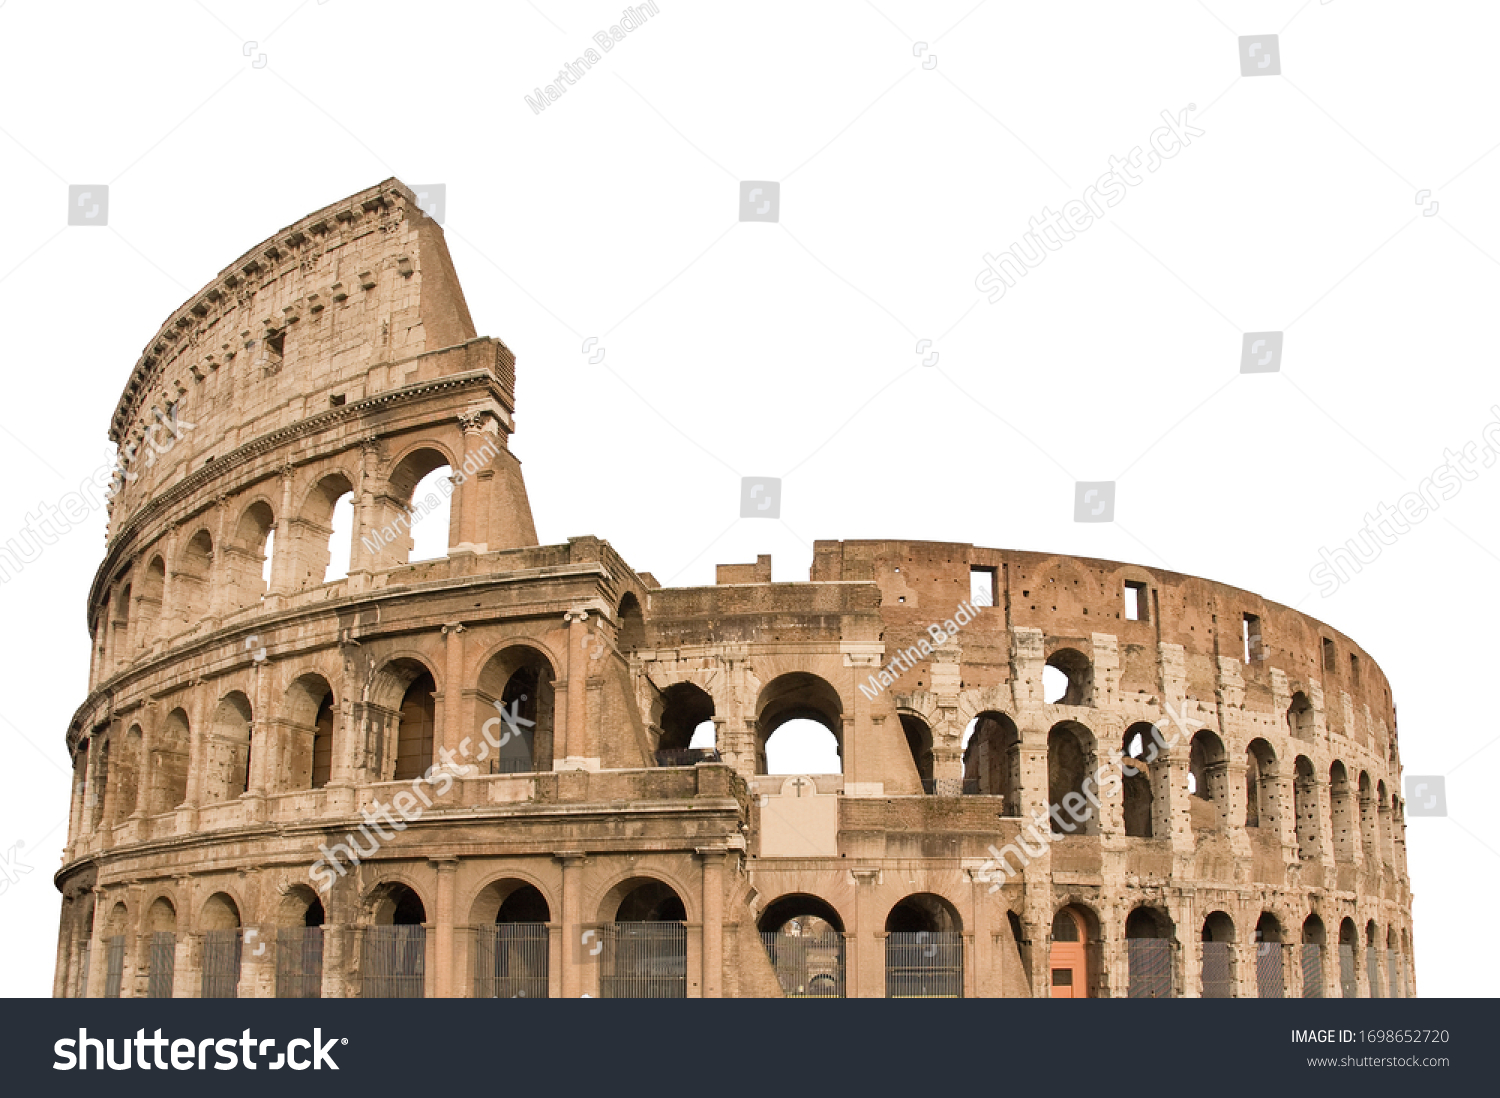 Colosseum, or Coliseum, isolated on white background. Symbol of Rome and Italy #1698652720